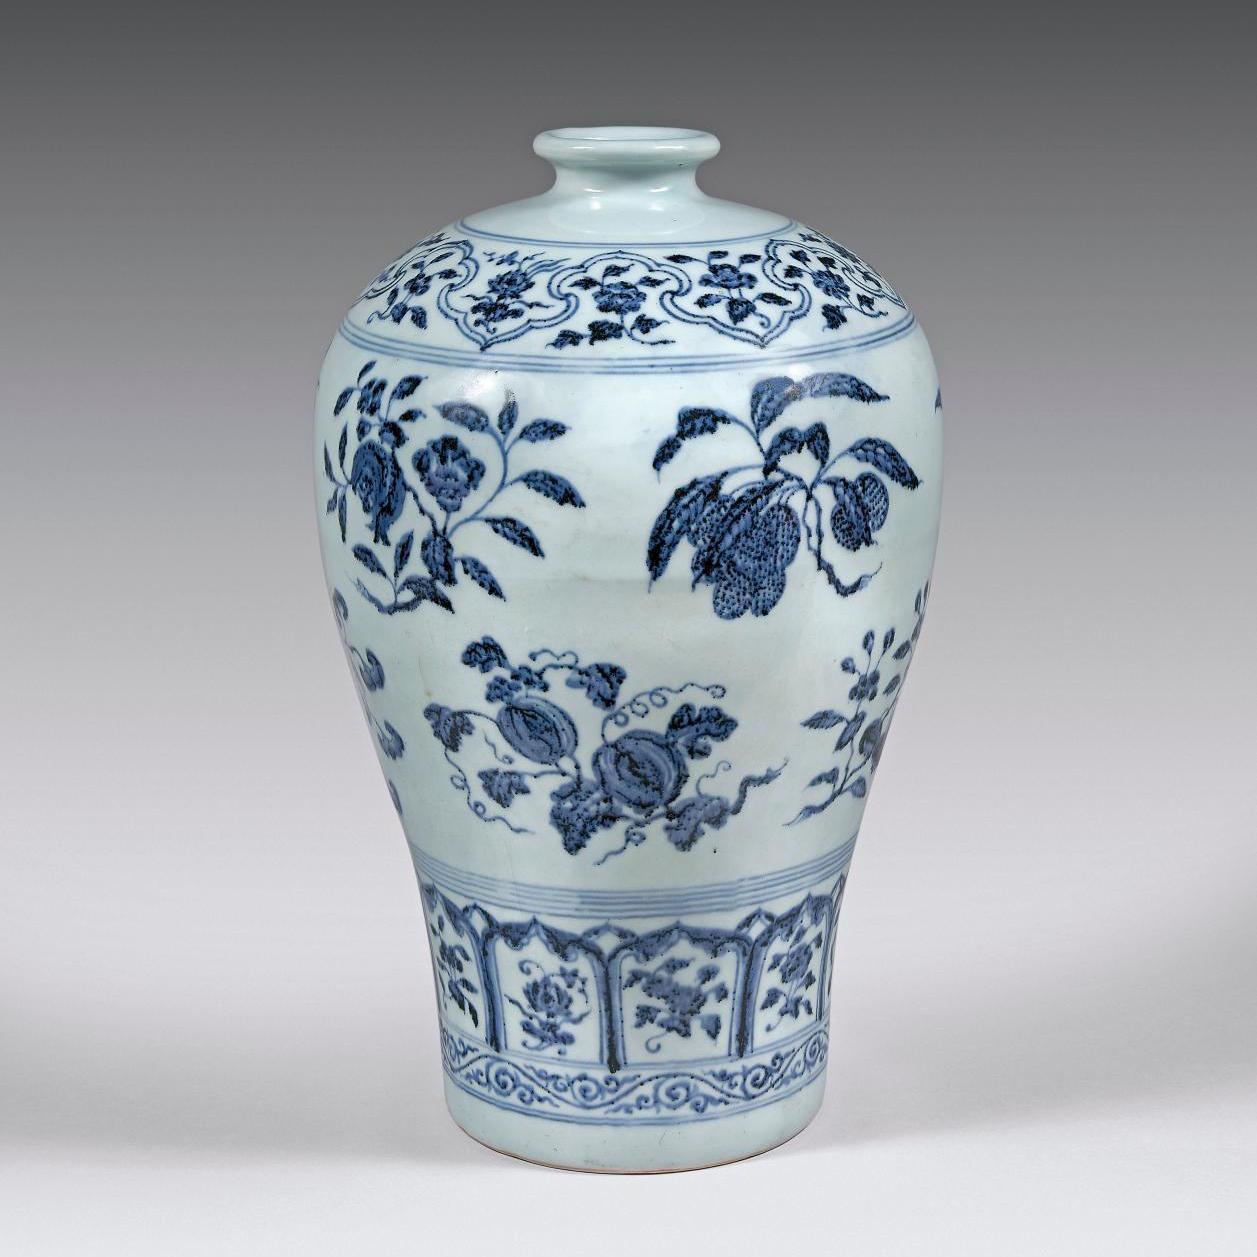 An Imperial Bid for a Ming Vase